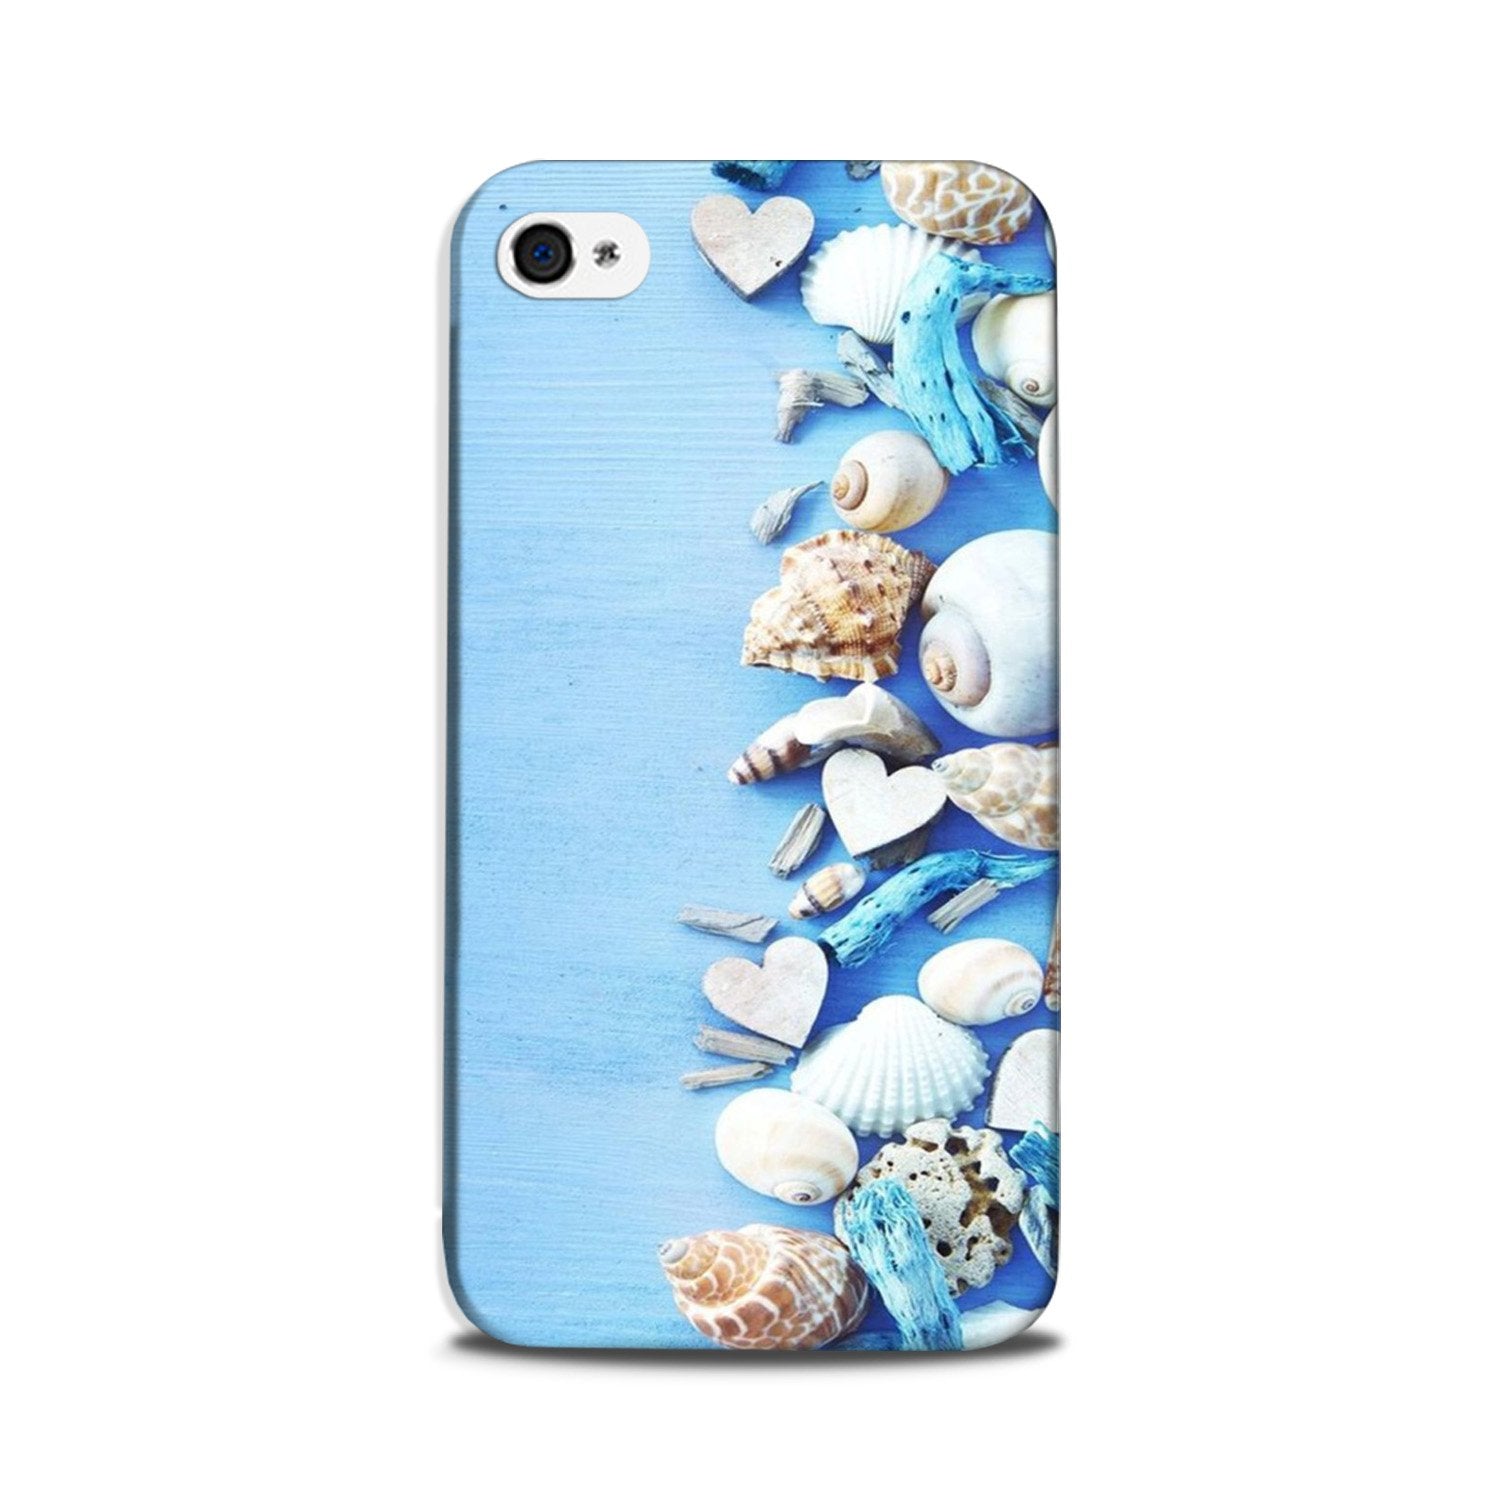 Sea Shells2 Case for iPhone 5/ 5s